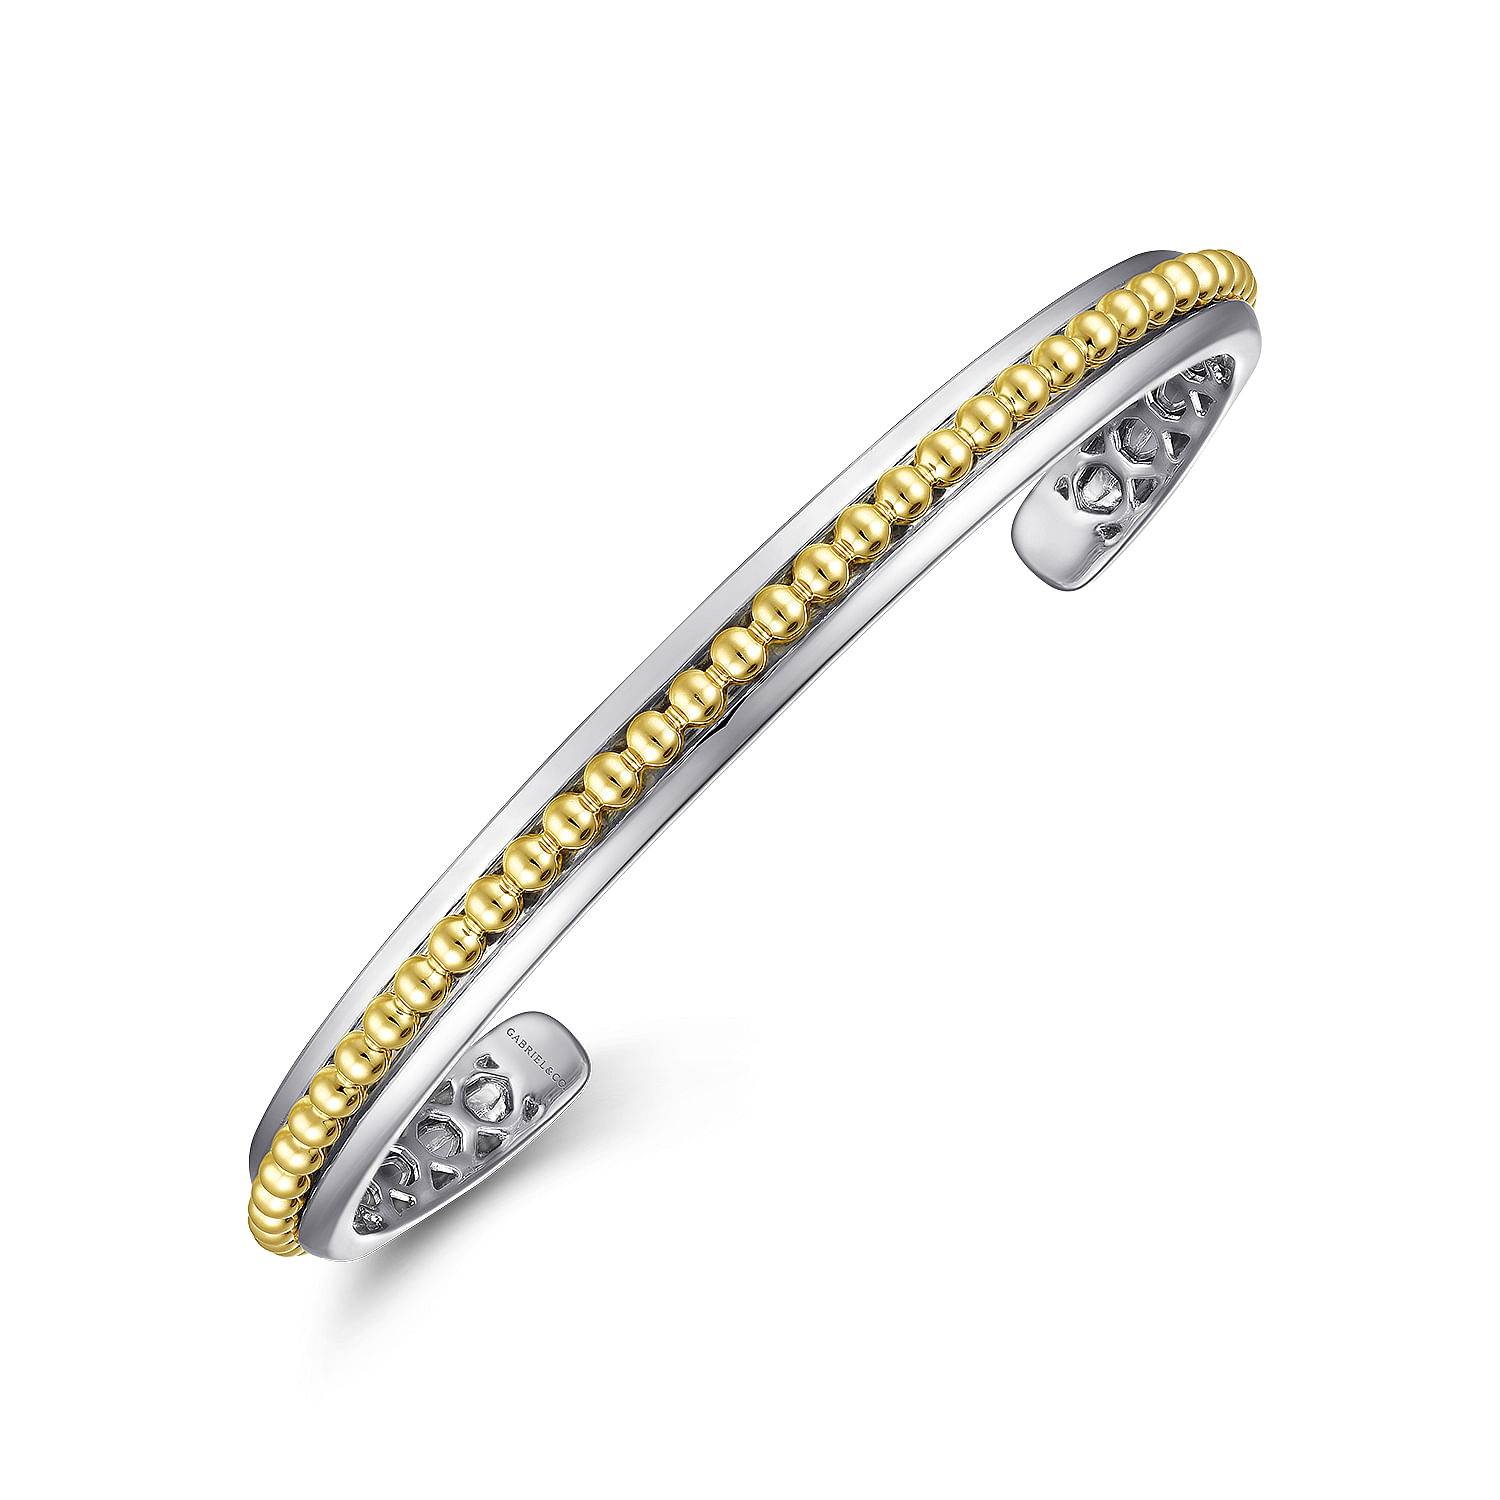 925 Sterling Silver Open Cuff Bracelet with 14K Yellow Gold Beads